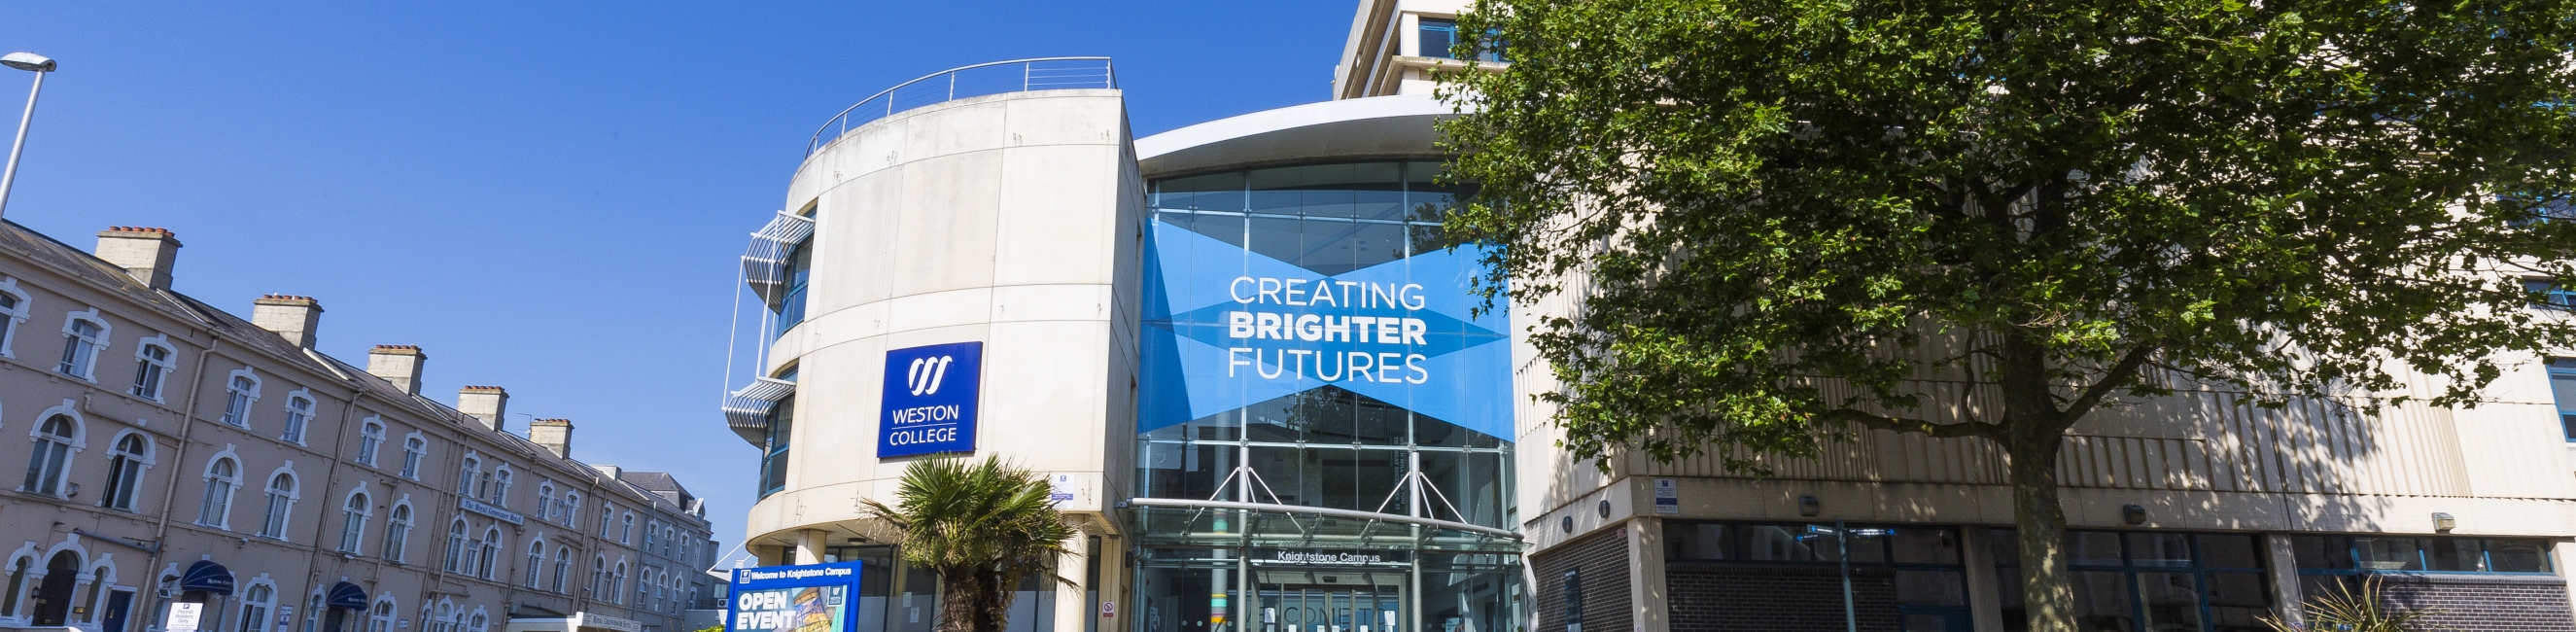 creating brighter futures with Weston College